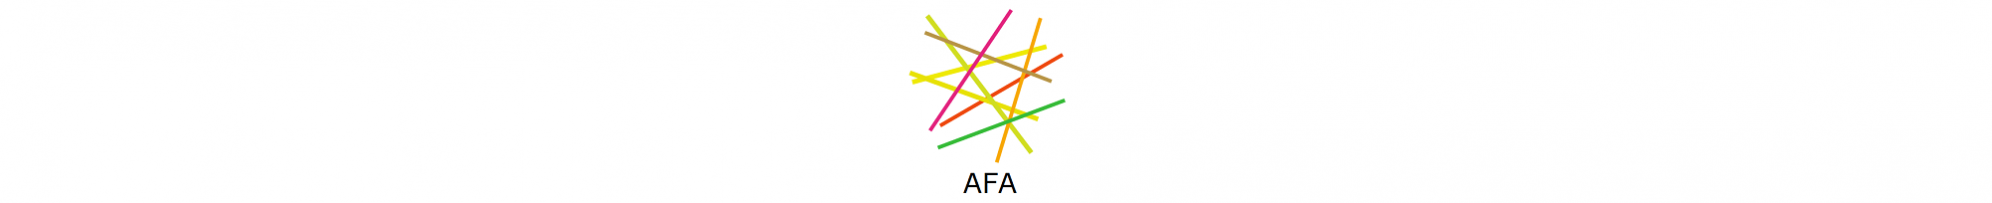 AFA is a tools for financial and economic analysis of agri-food value chains